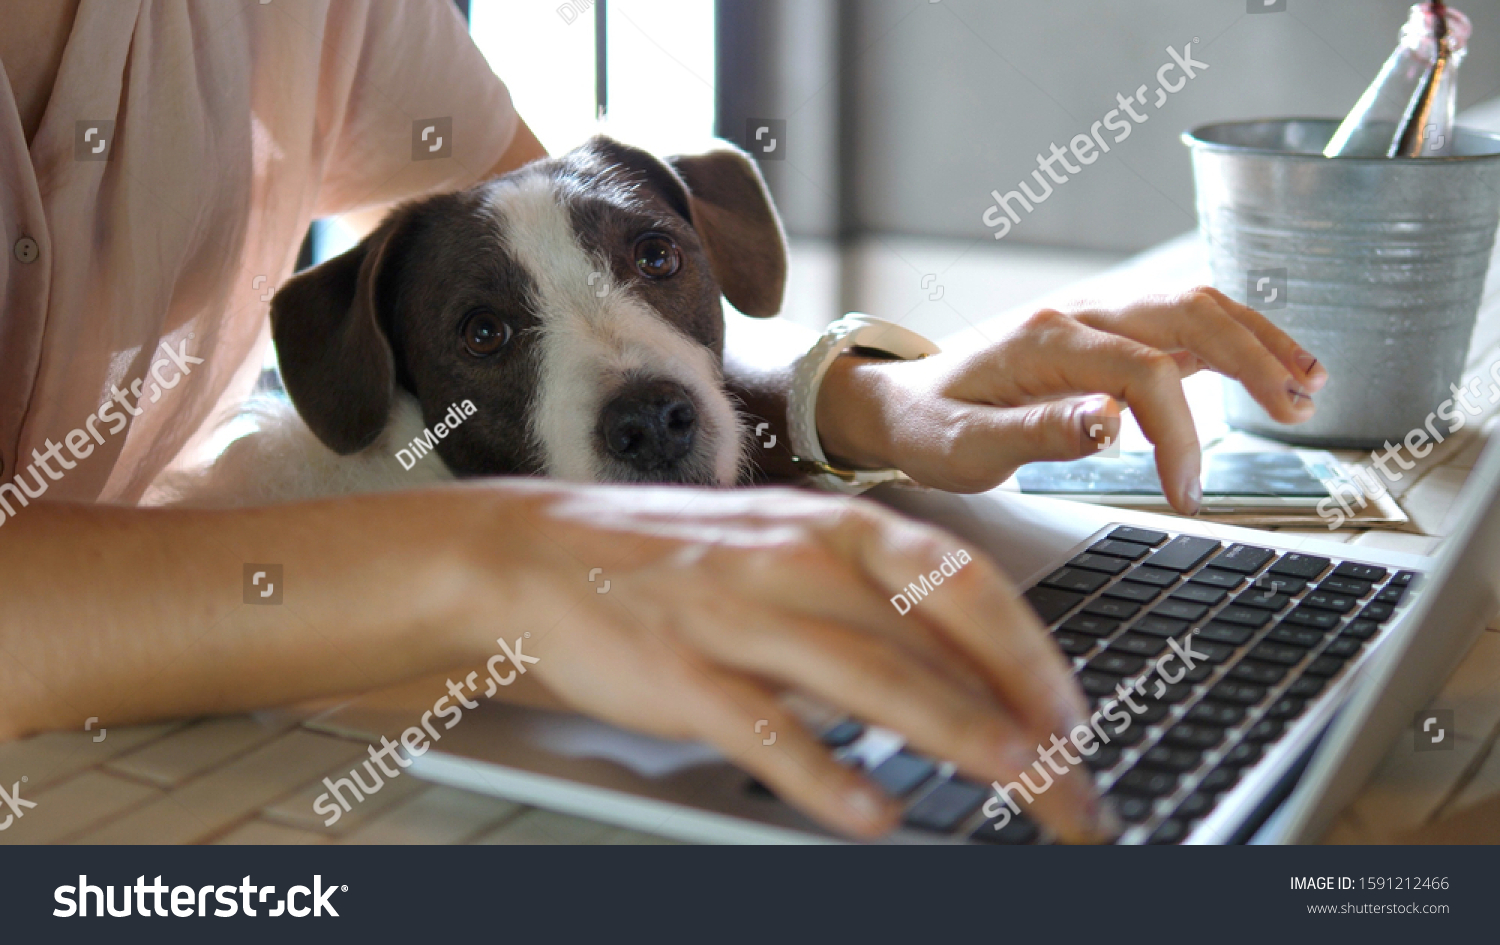 Female Hands Working On Laptop With Cute Dog #1591212466